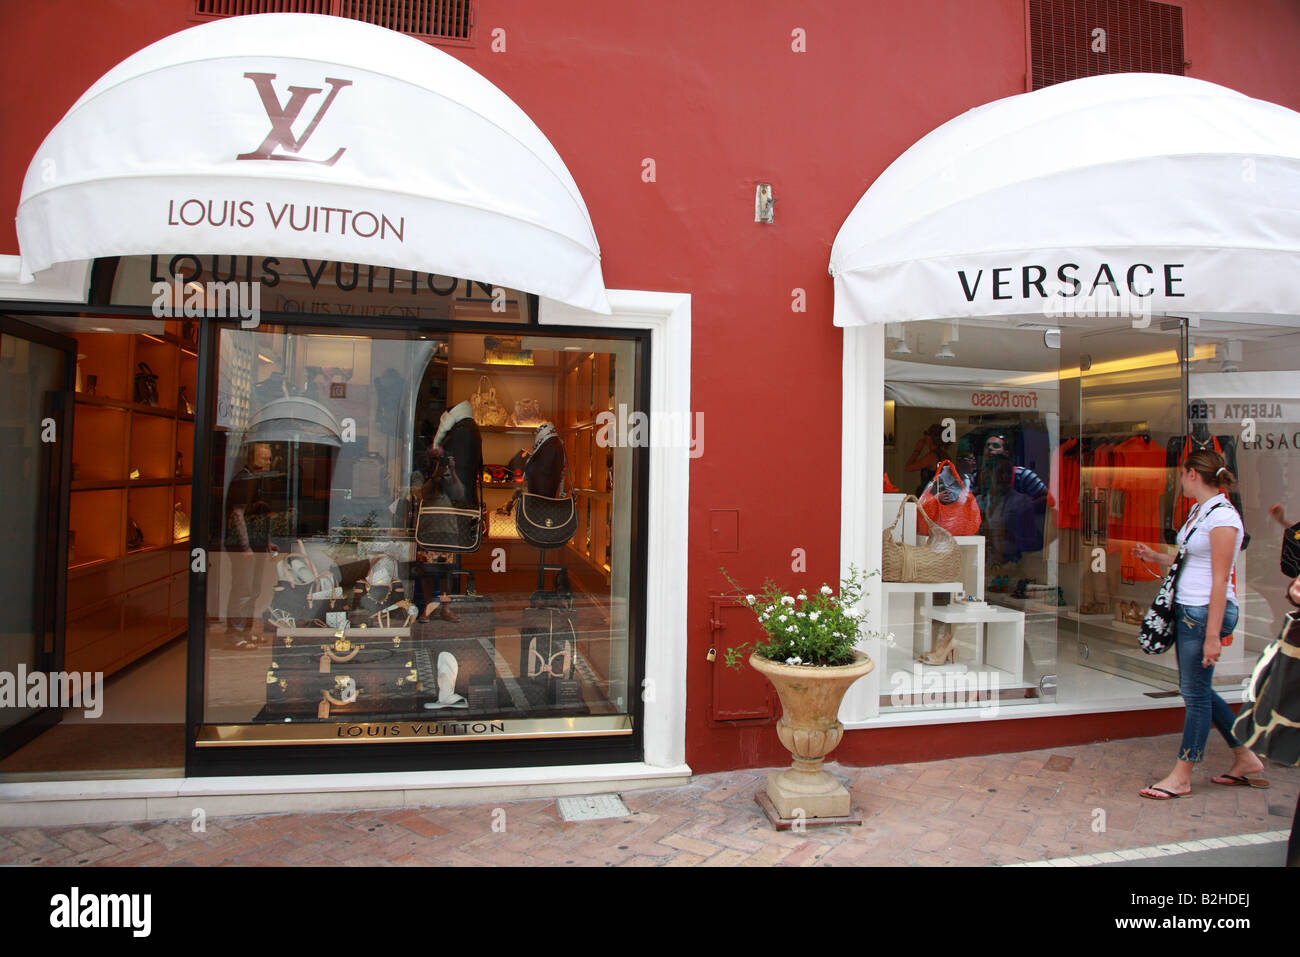 Louis Vuitton and Versace boutiques in Via Camerelle on Capri Stock Photo: 18823466 - Alamy